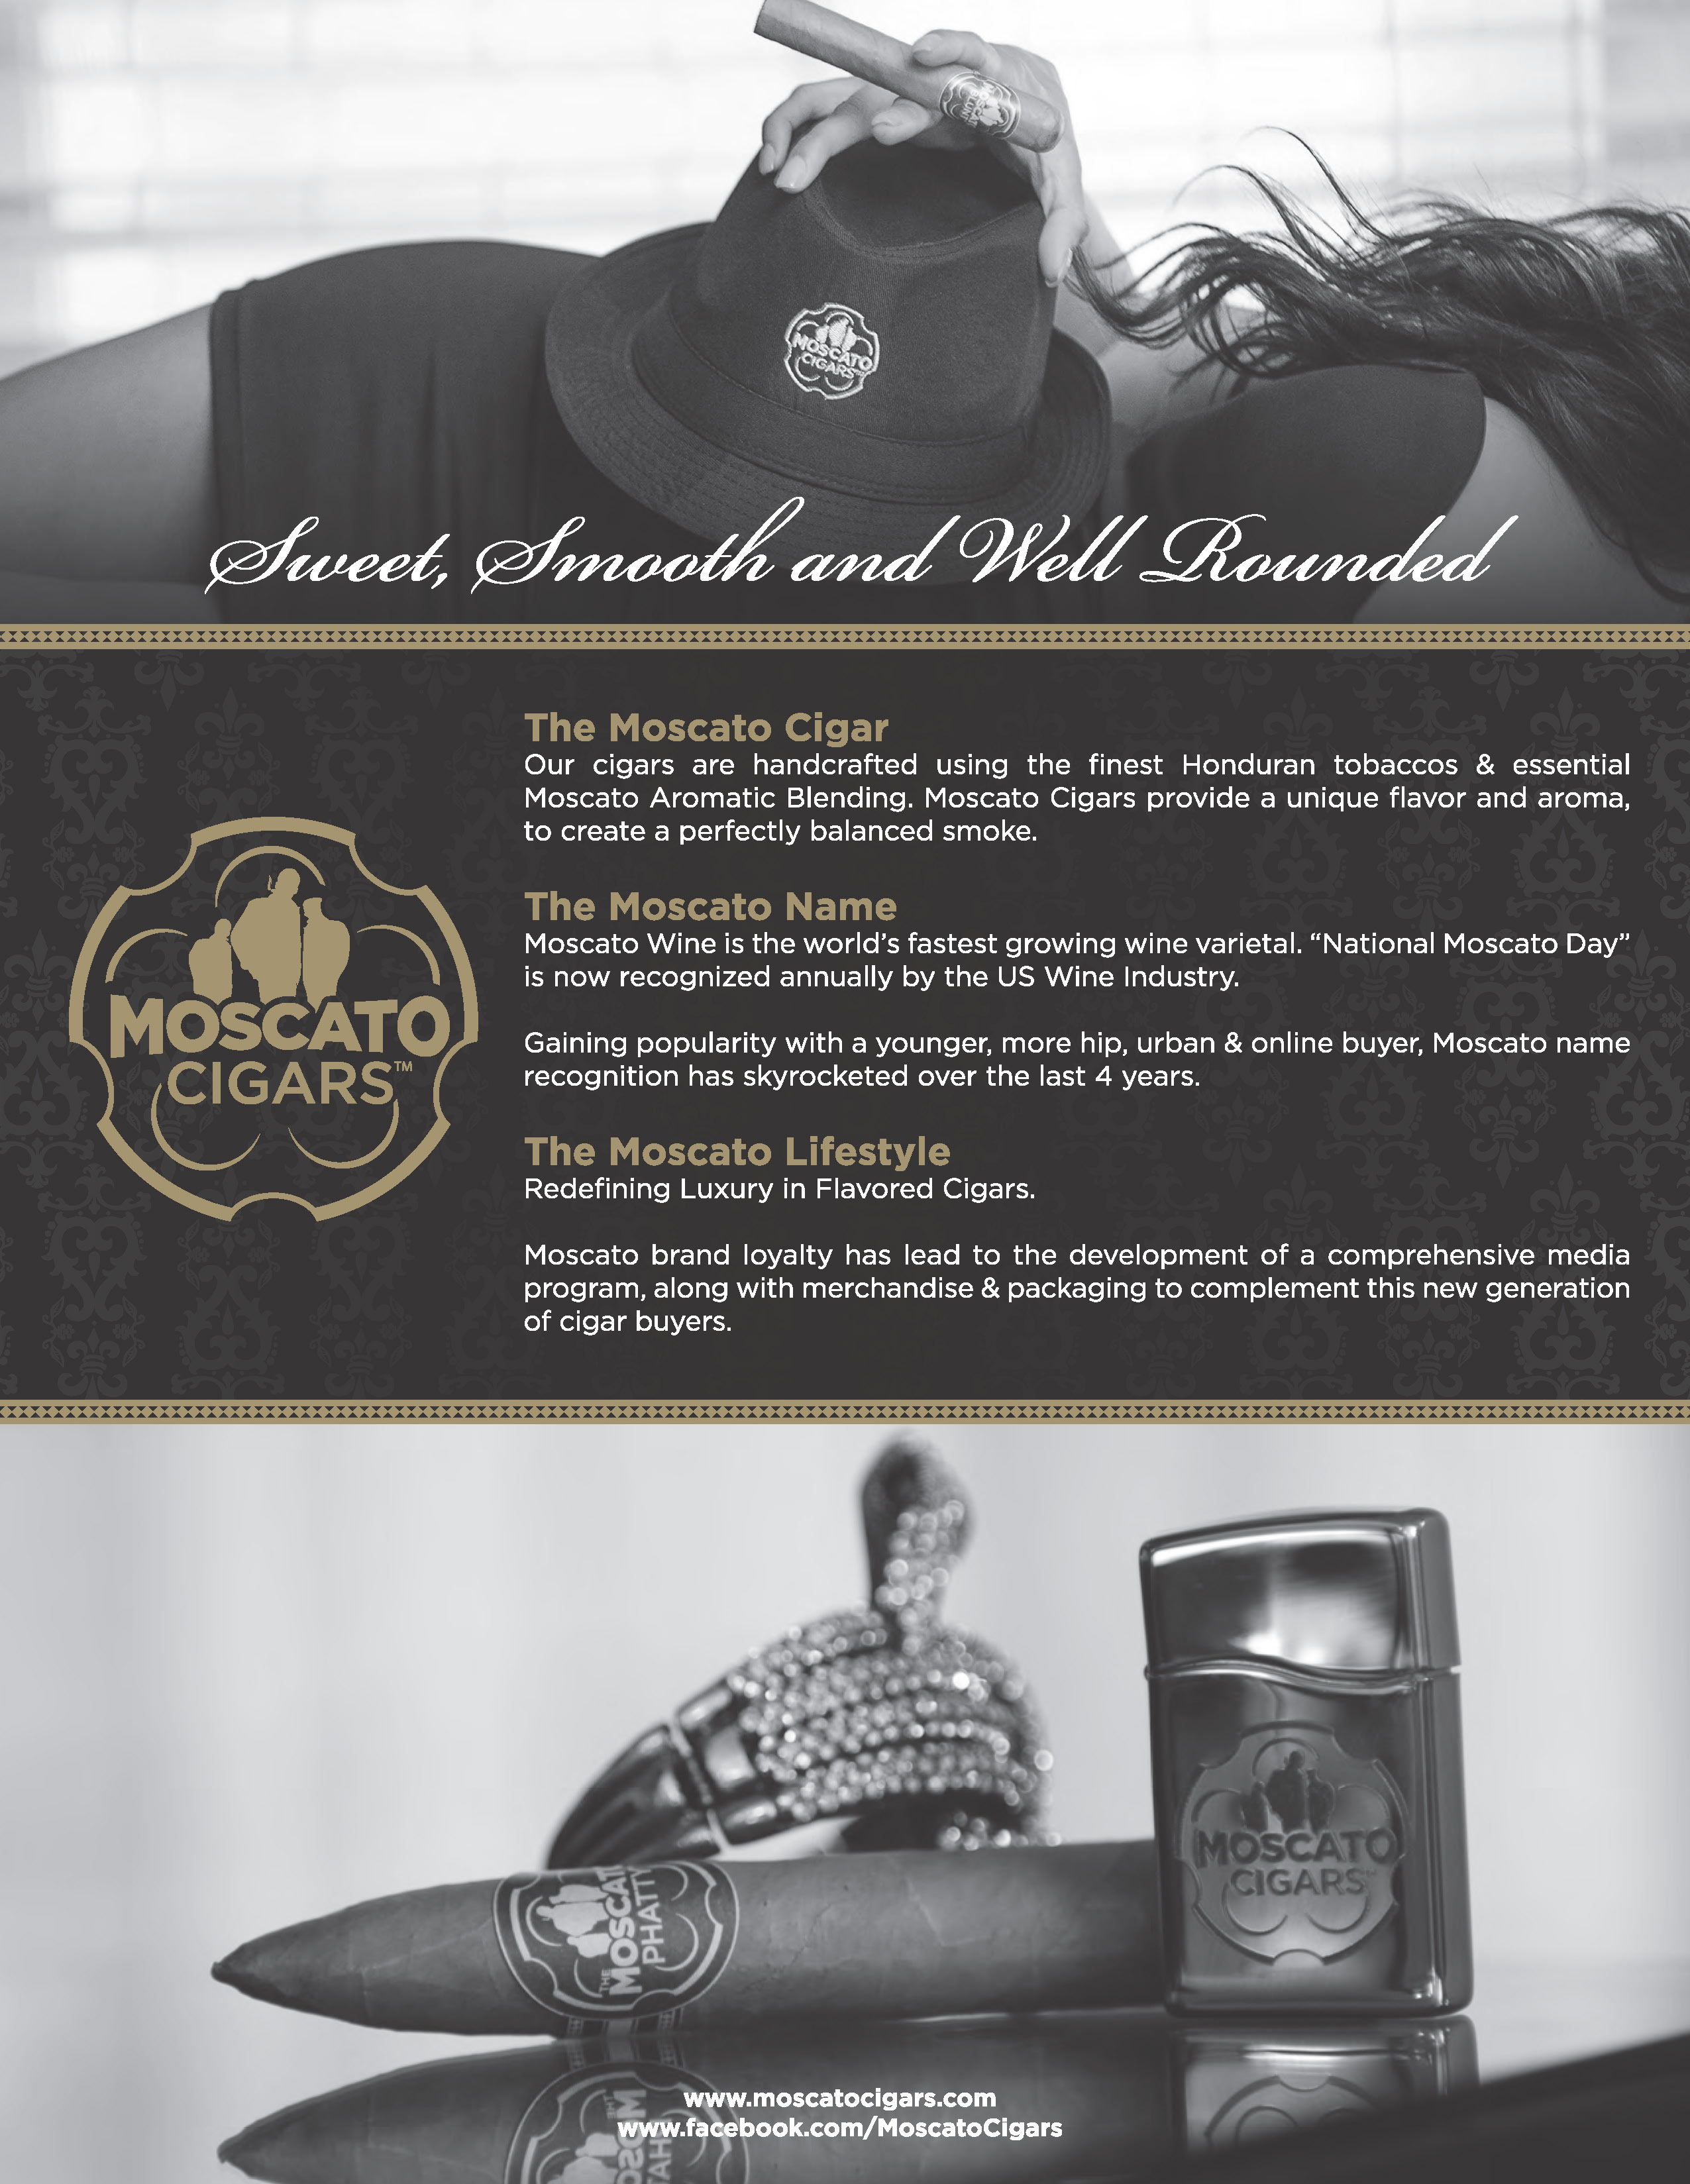 Moscato Cigars Announces 2014 Cigar Festival Tour Dates Moscato cigars south is the designated sales representative for moscato cigars in south carolina and georgia. moscato cigars announces 2014 cigar